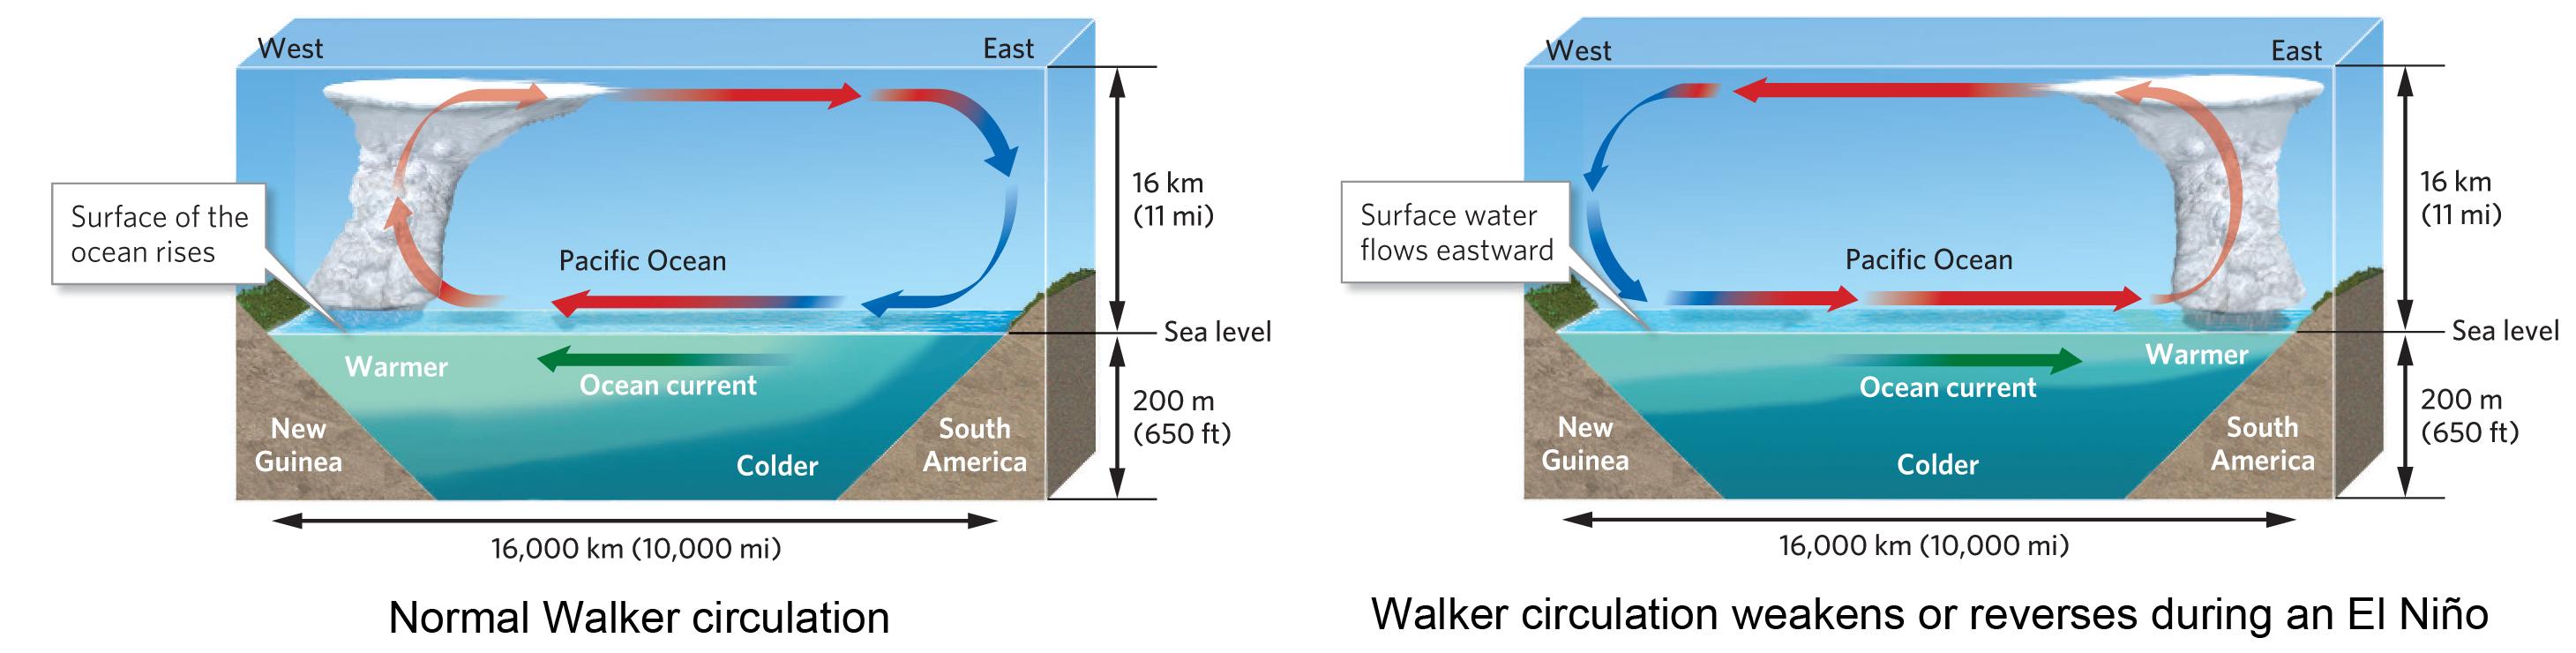 Solved The graphics illustrate normal Walker circulation, 